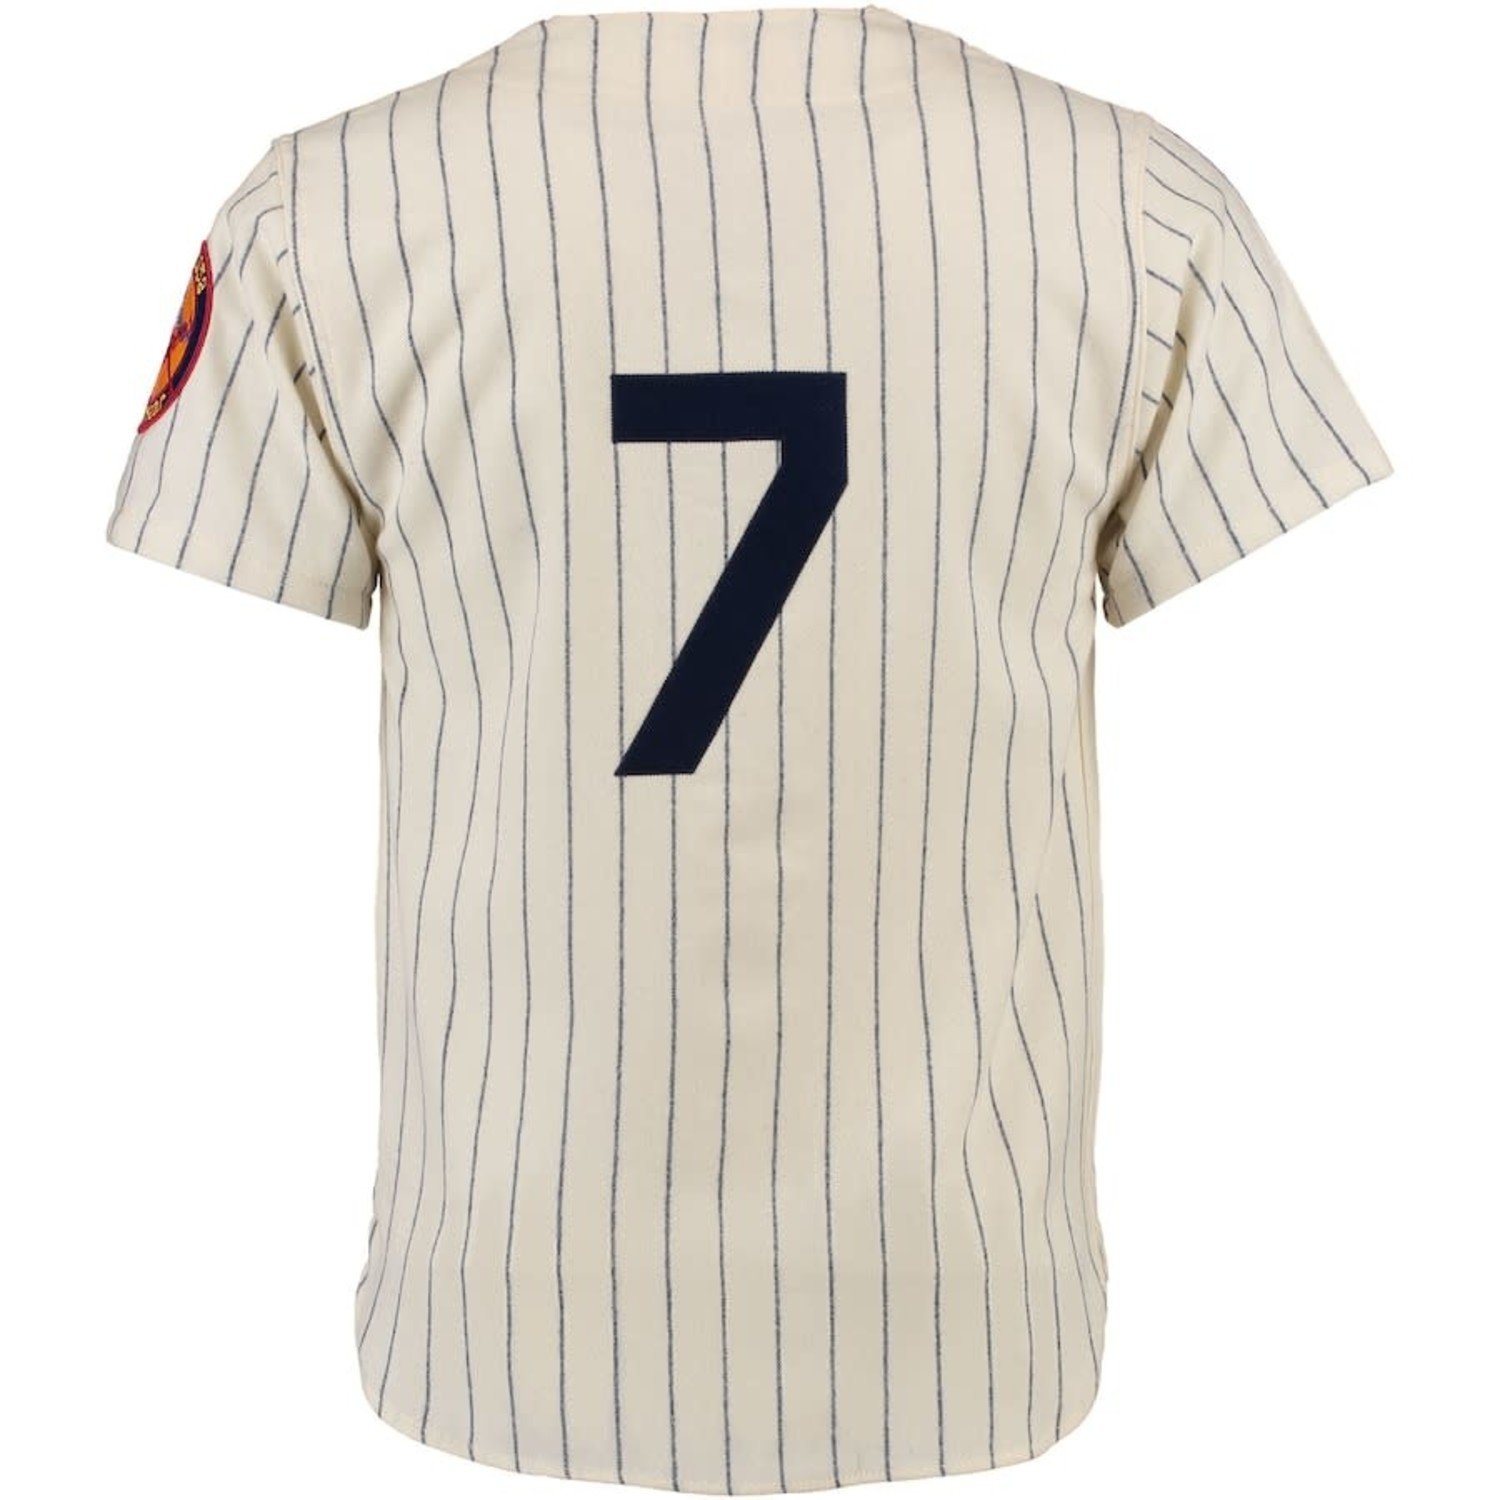 yankees jersey number